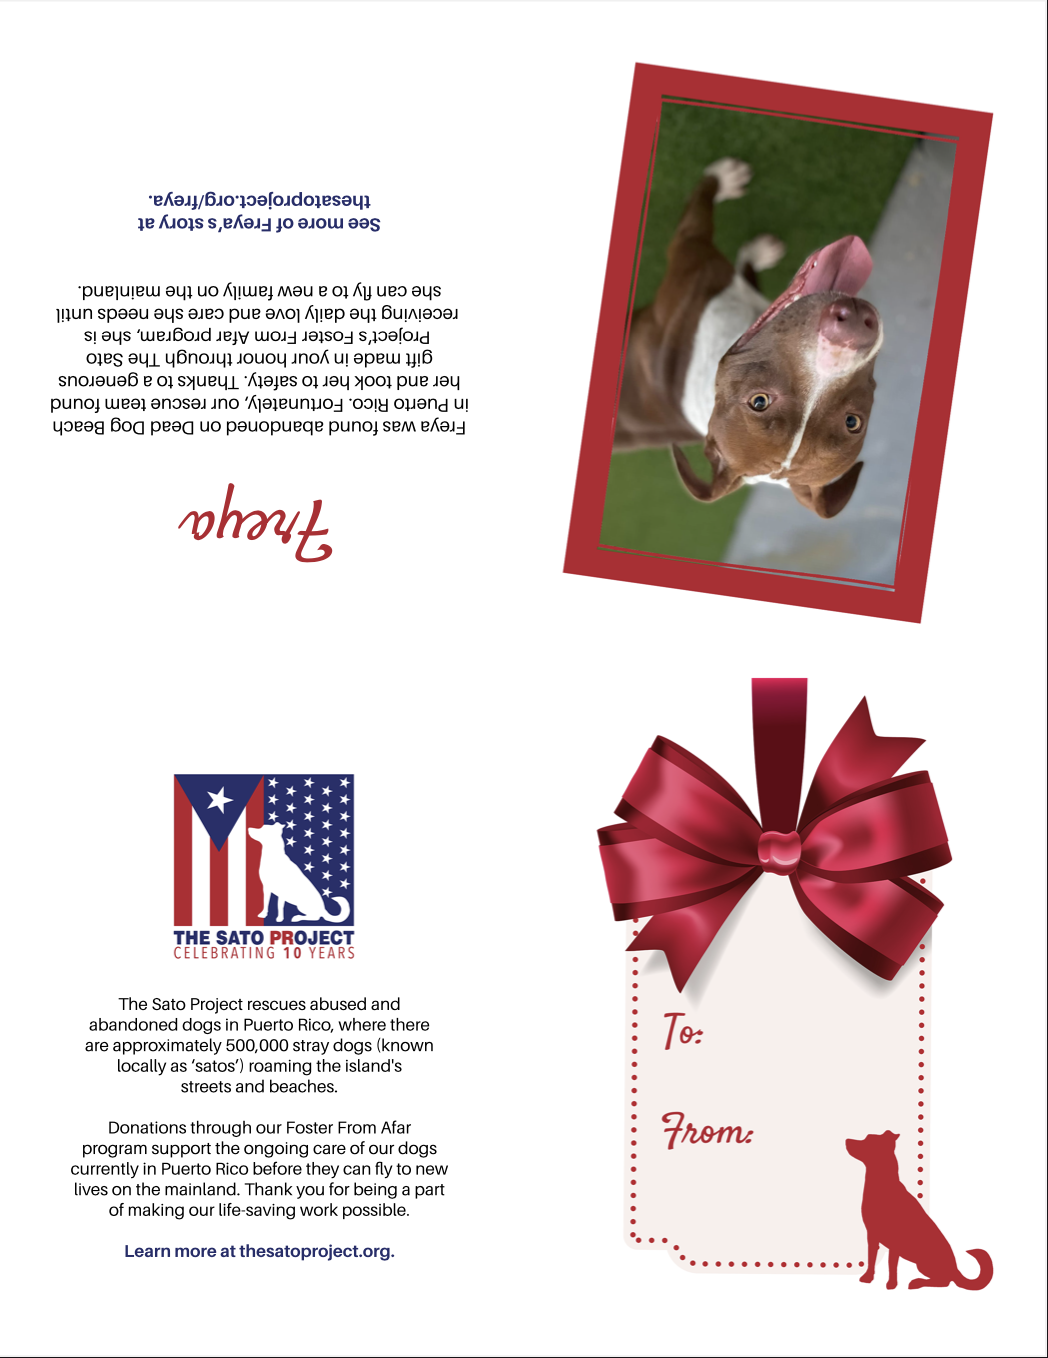 You'll also receive this printable card to give your donation as a gift!